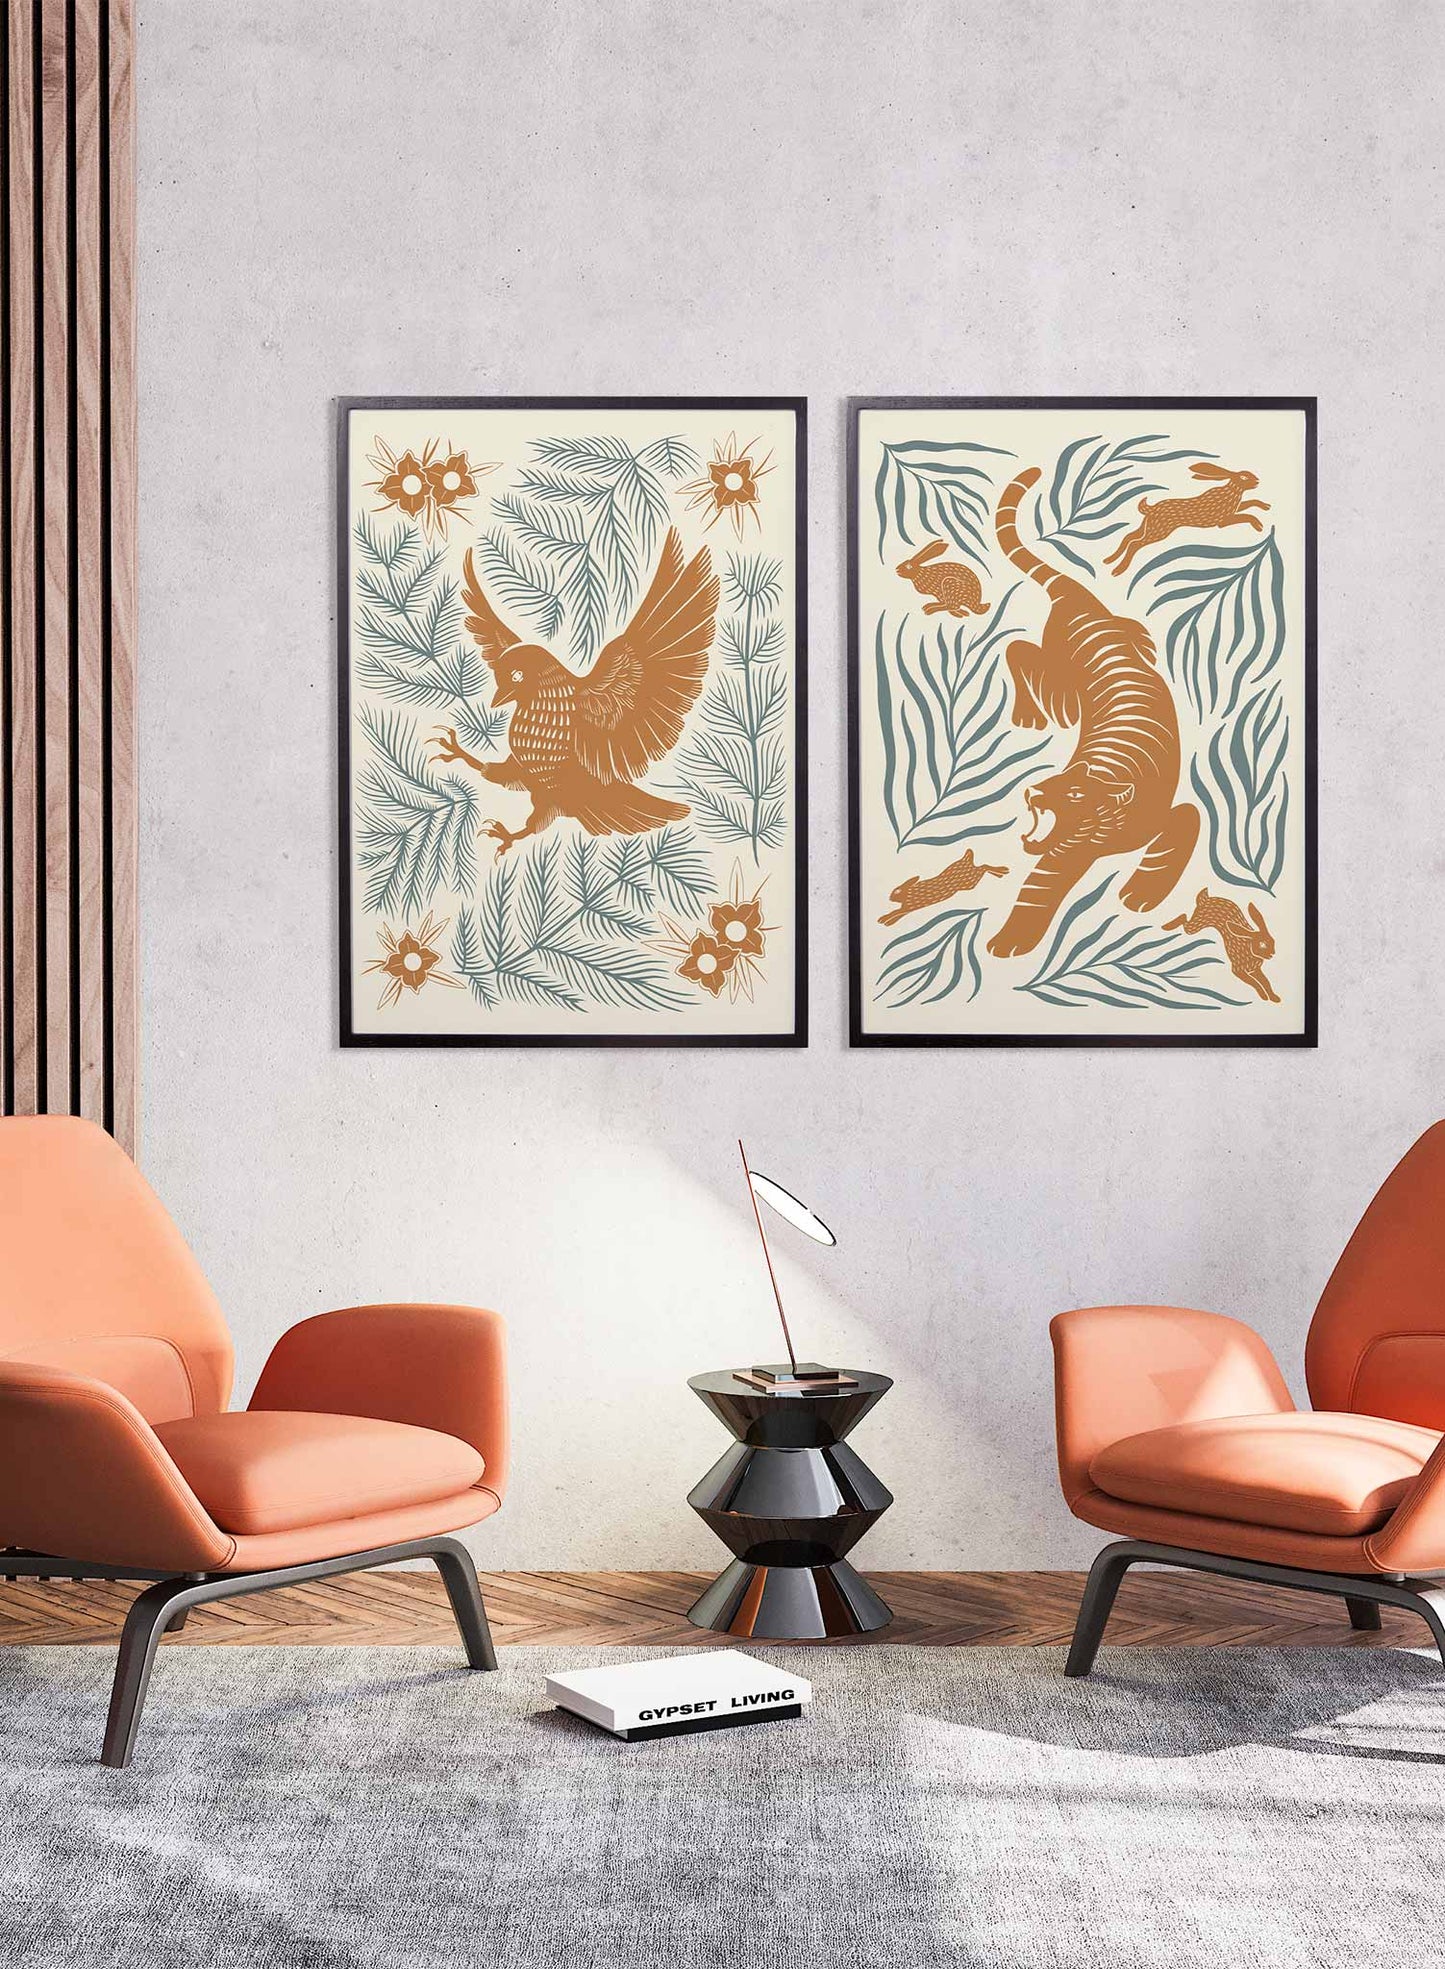 Raptor is a minimalist illustration of an orange peregrine falcon ready to grab its prey with its claws on a flora background by Opposite Wall.